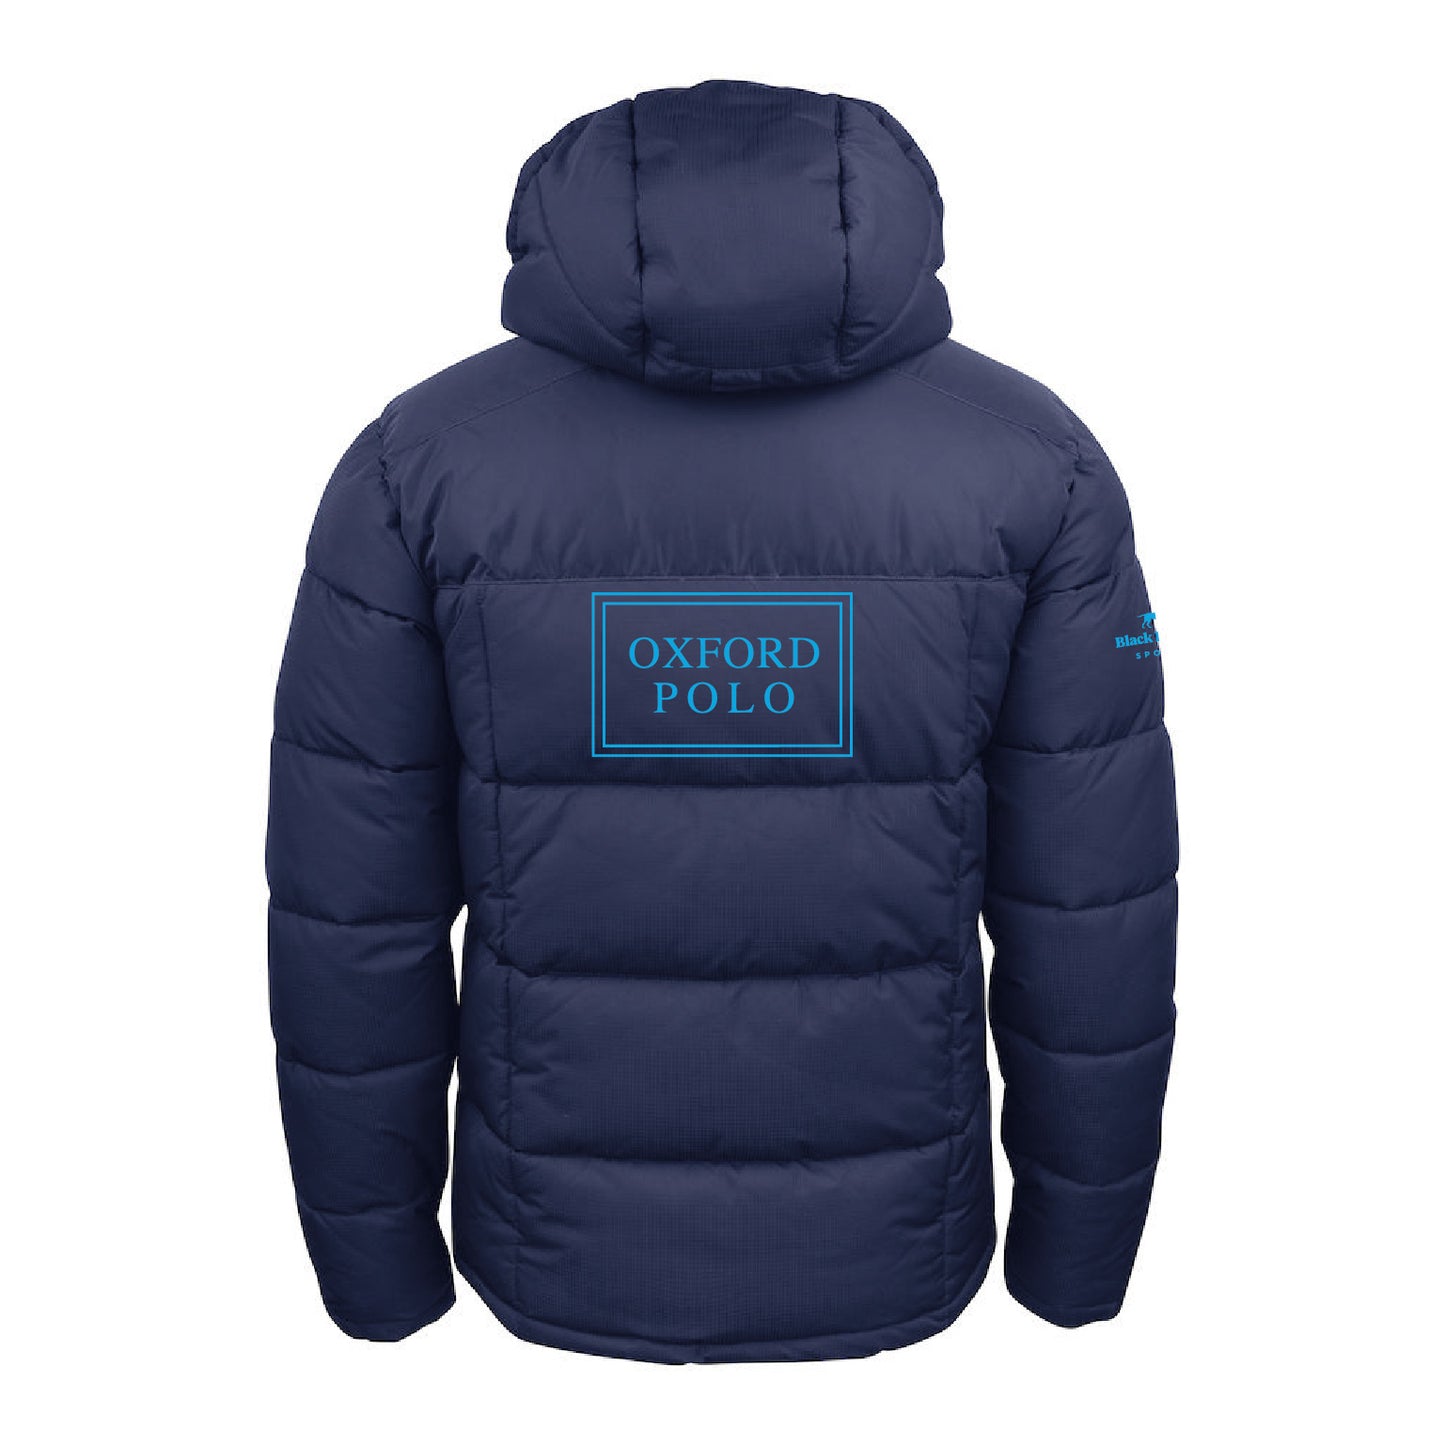 Oxford Polo Mens Thick Winter Jacket